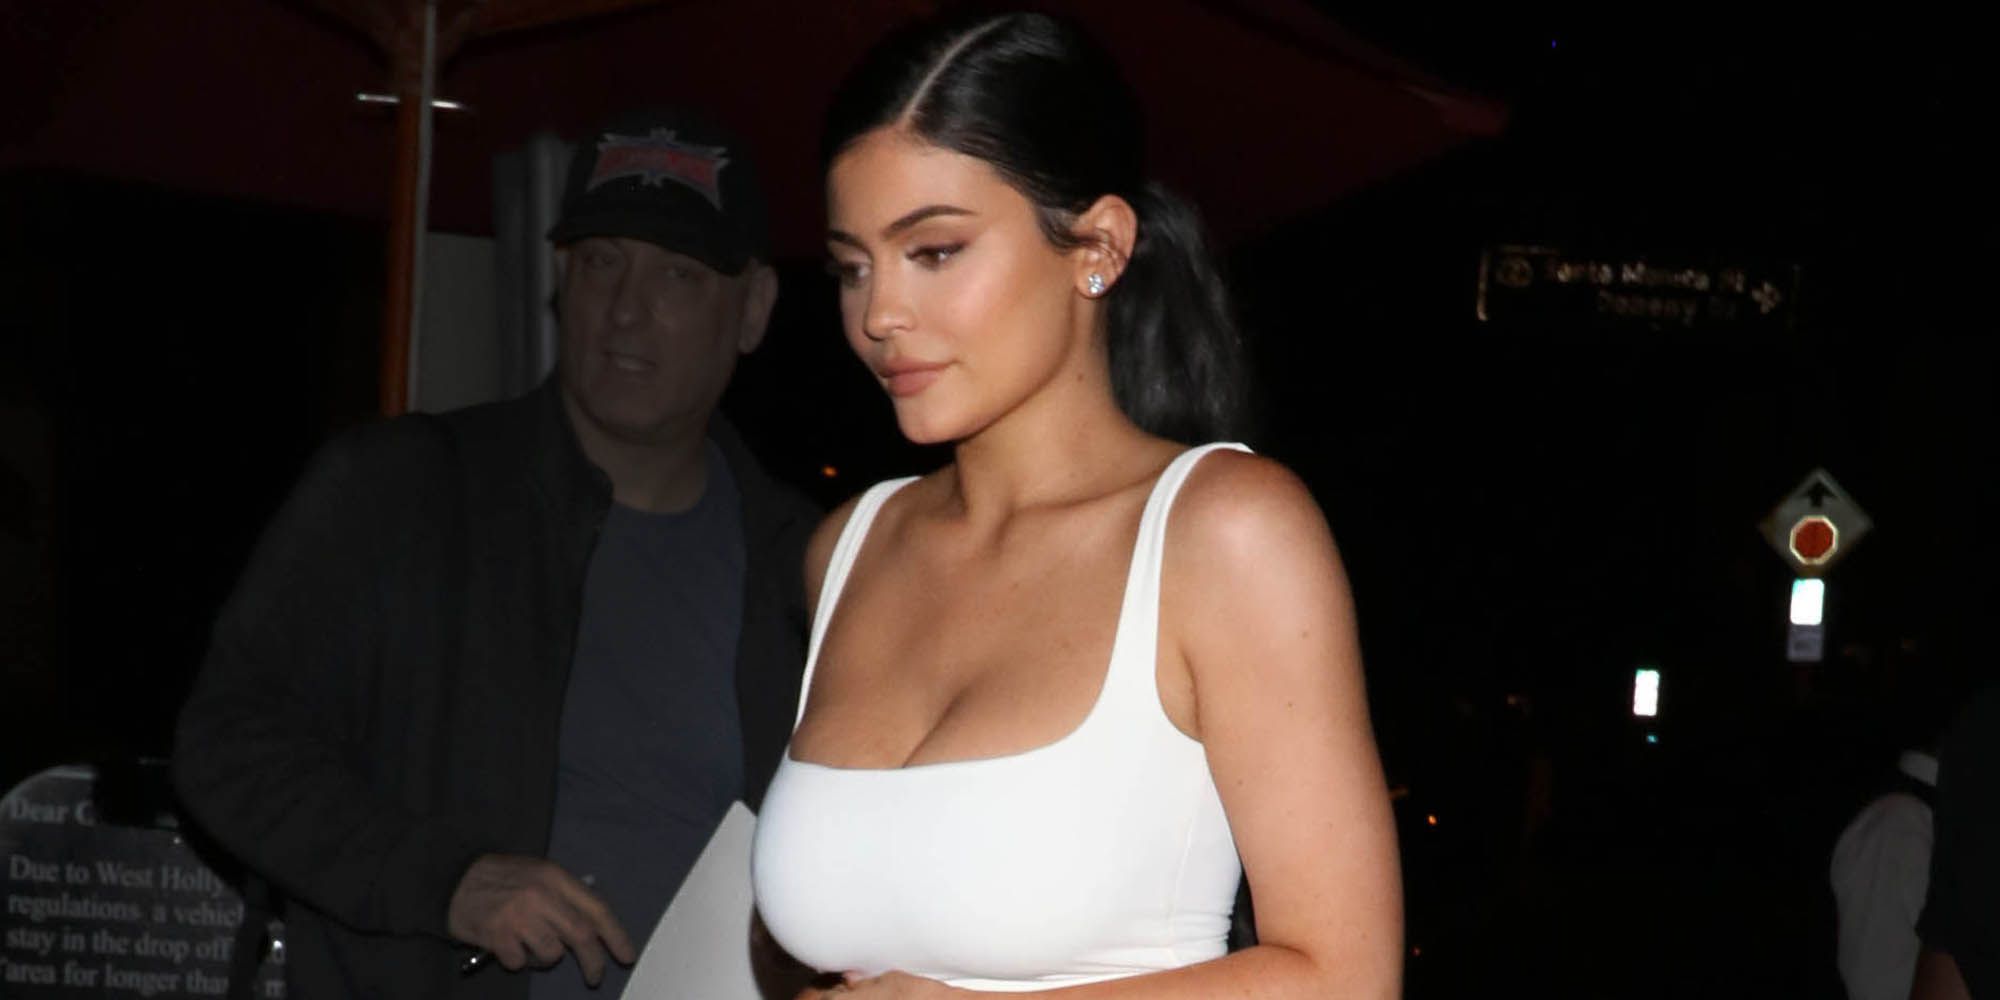 Kylie Jenner flashes her toned tummy during appearance with mask